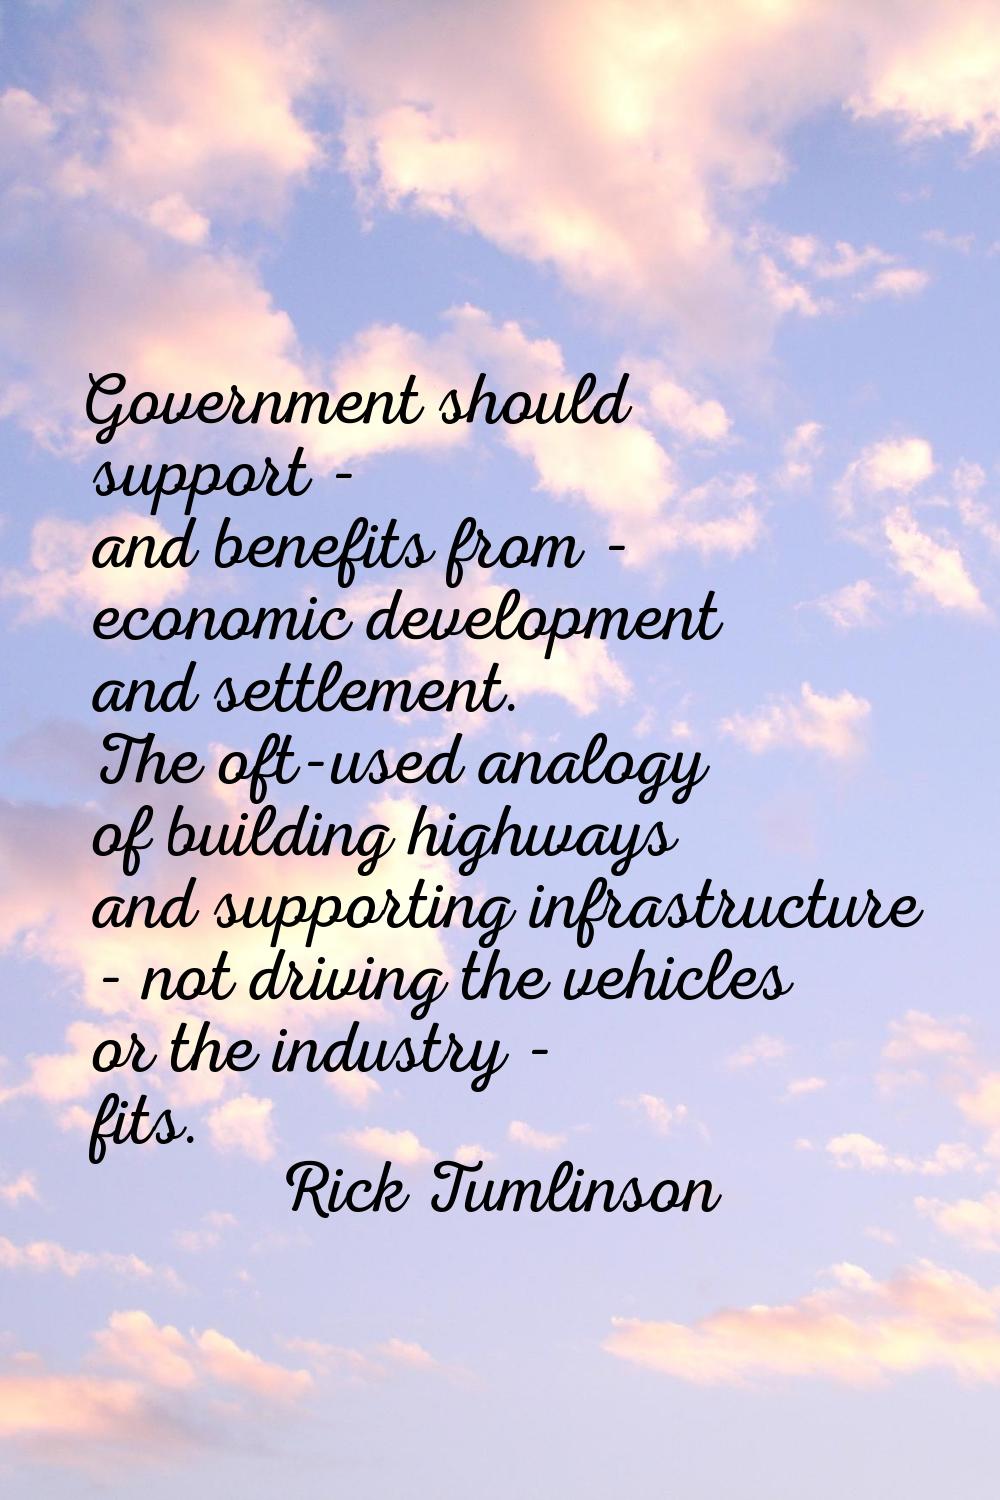 Government should support - and benefits from - economic development and settlement. The oft-used a